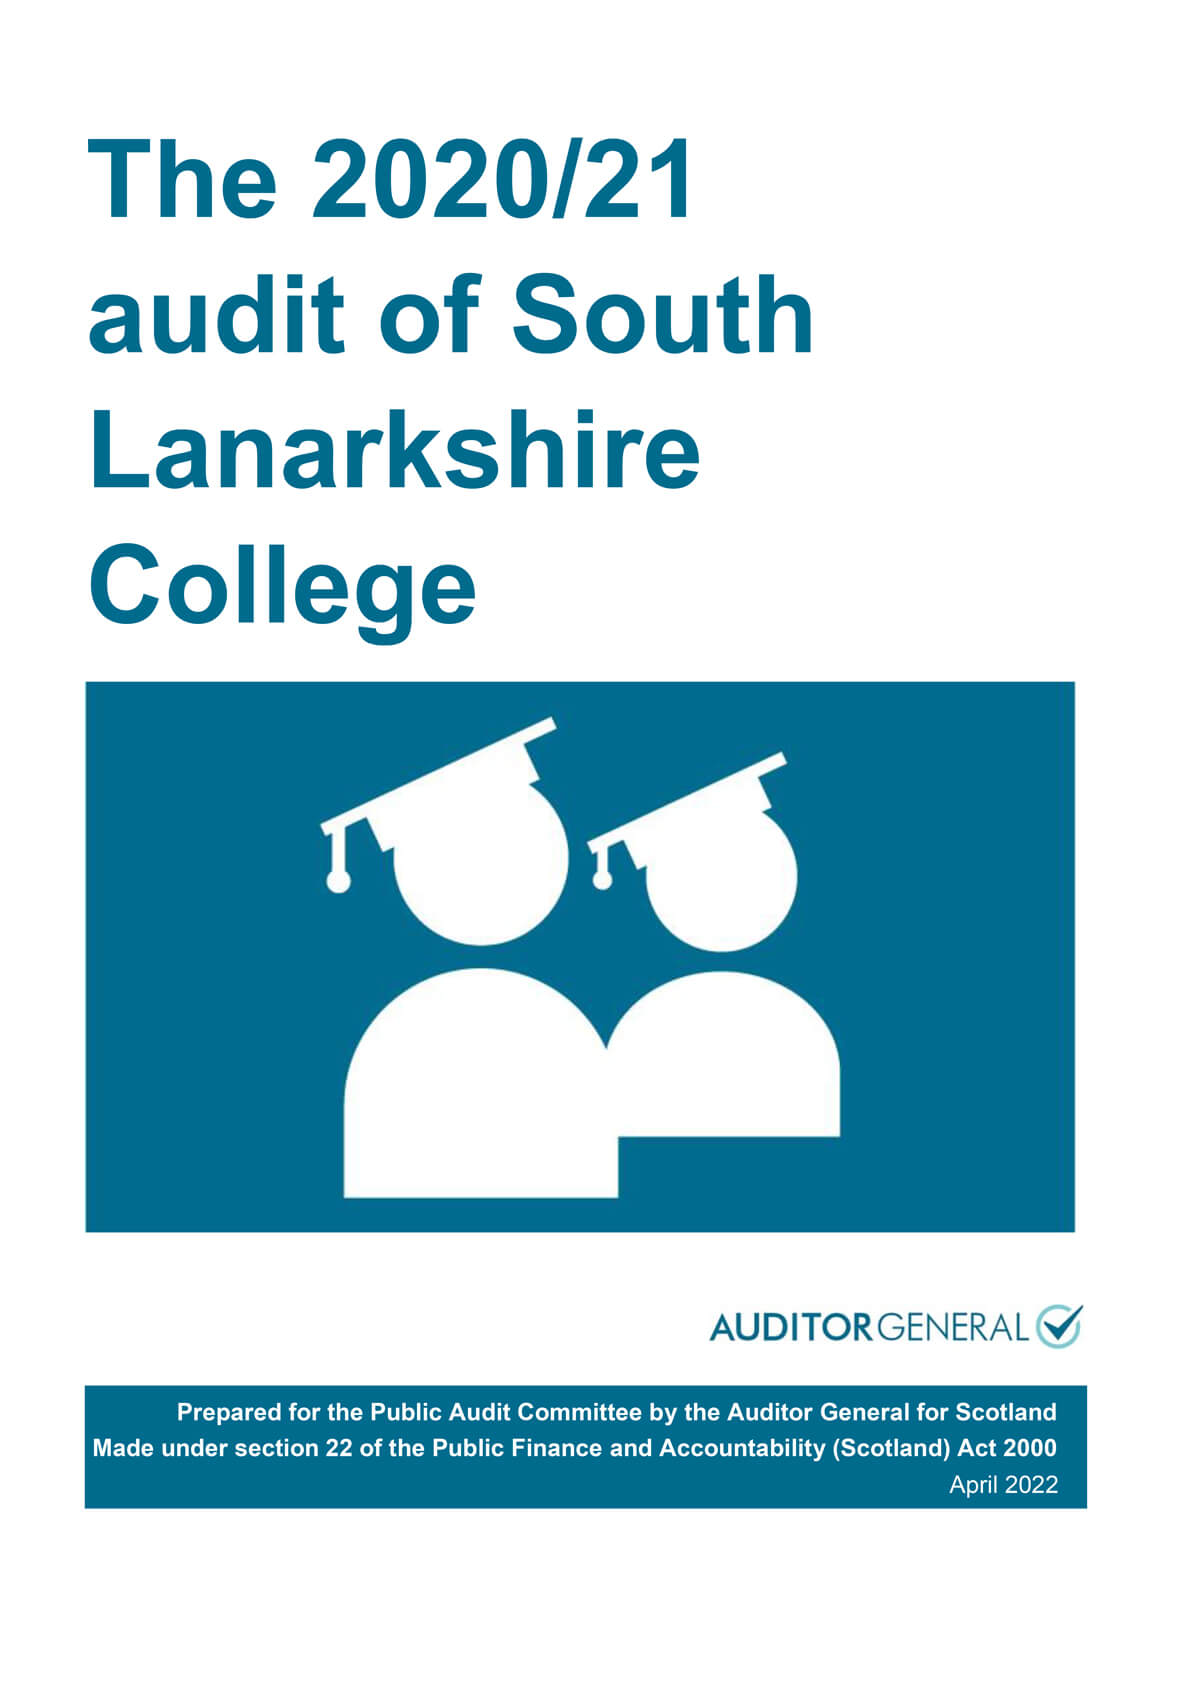 View The 2020/21 audit of South Lanarkshire College